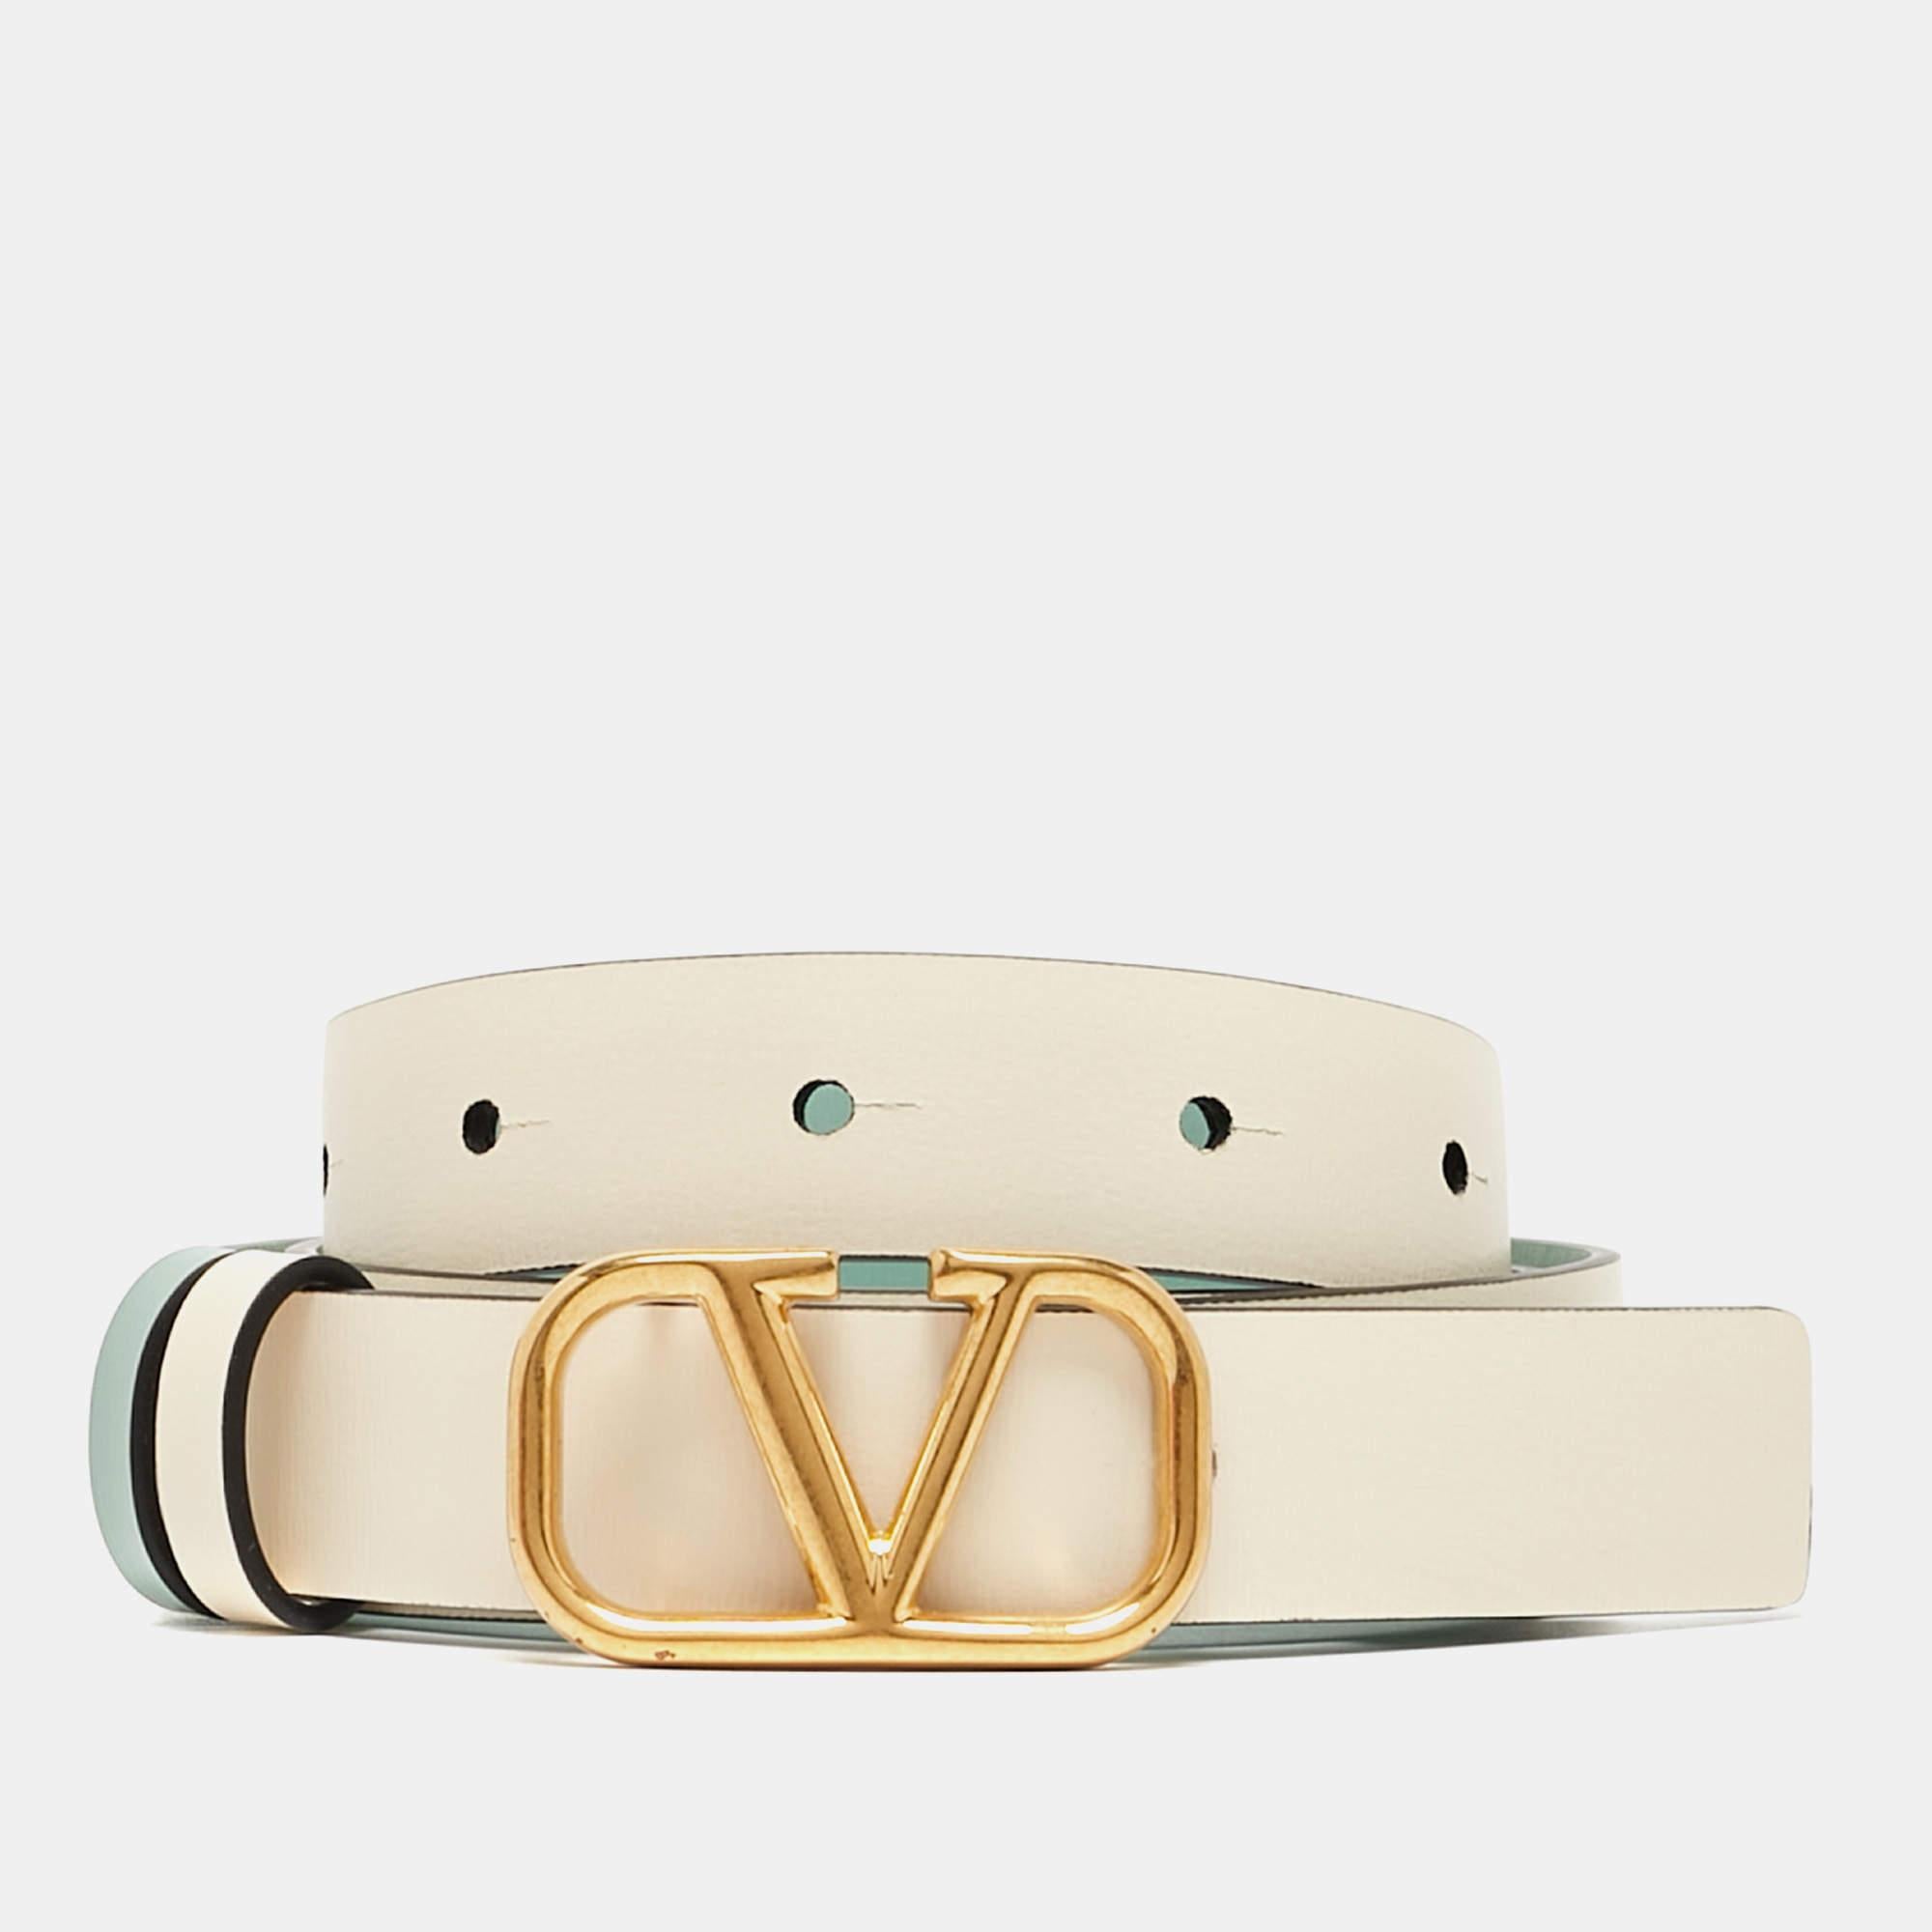 Belts are fine accessories to upgrade any basic look to a statement-making one. We particularly love this offering by Valentino. Formed using leather, the reversible belt has a VLogo buckle for an impeccable finish.

